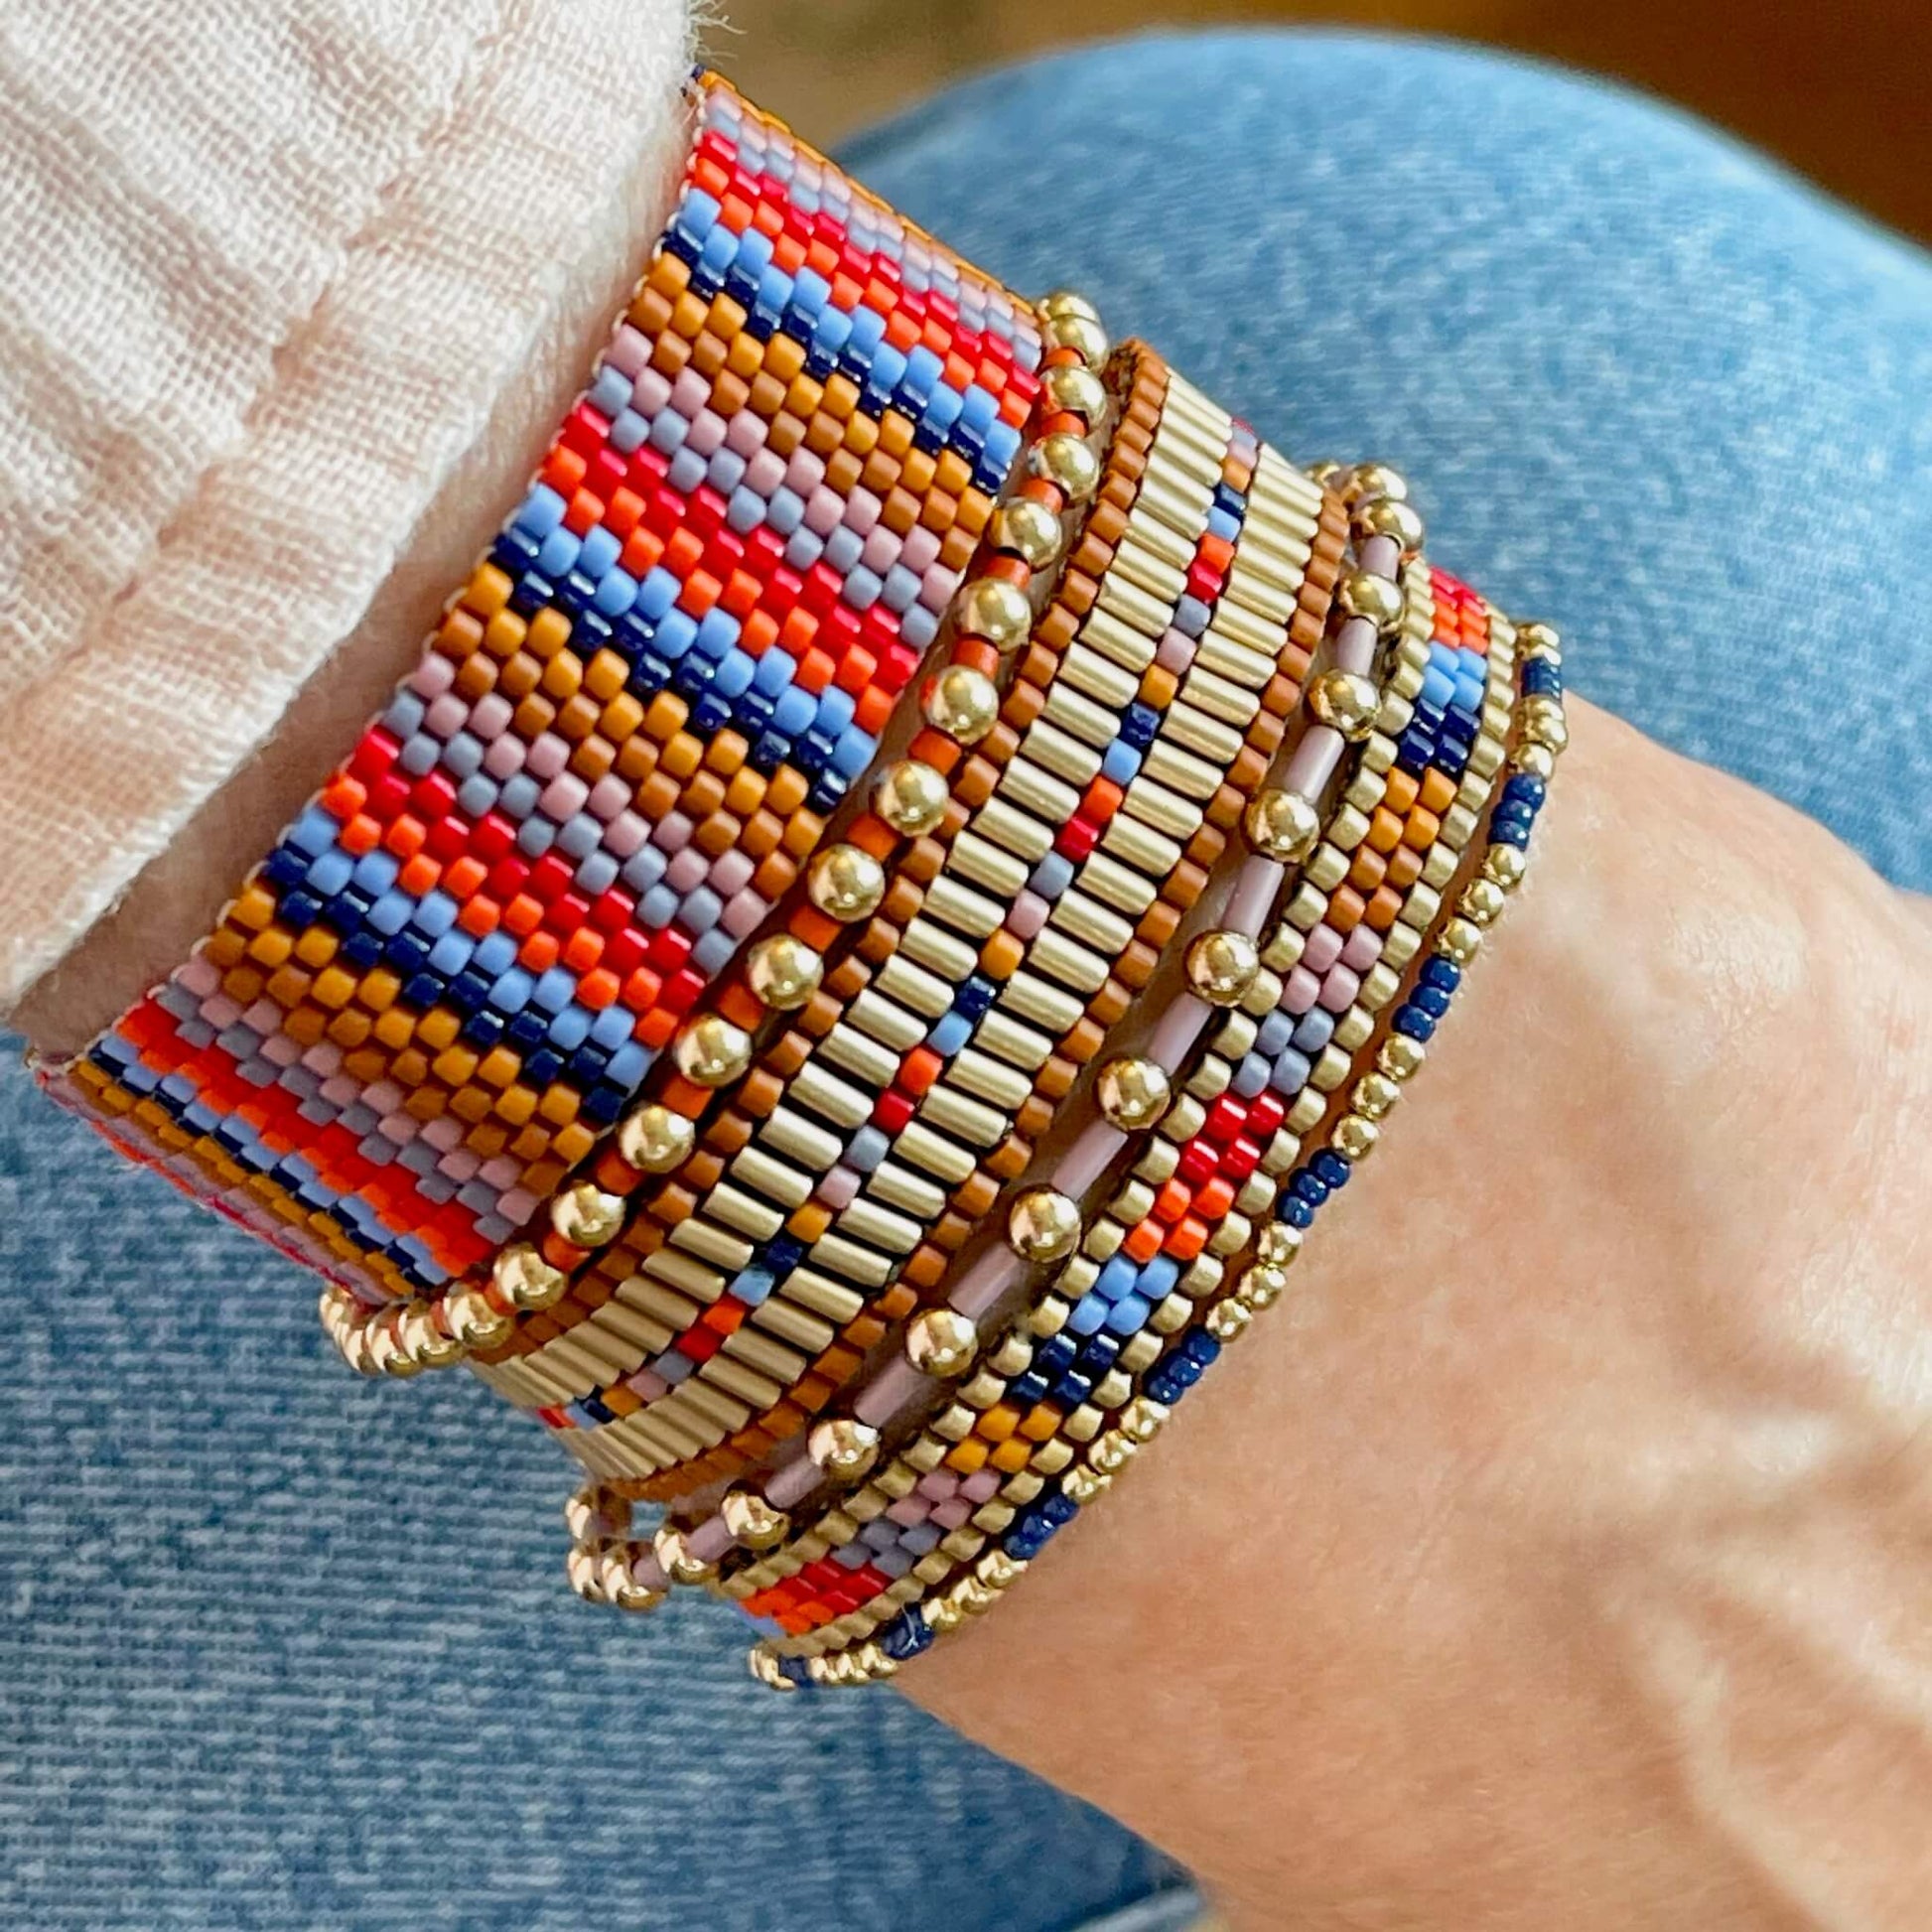 Beaded bracelet stack of 6 woven and stretch bracelets in a southwestern inspired color motif.